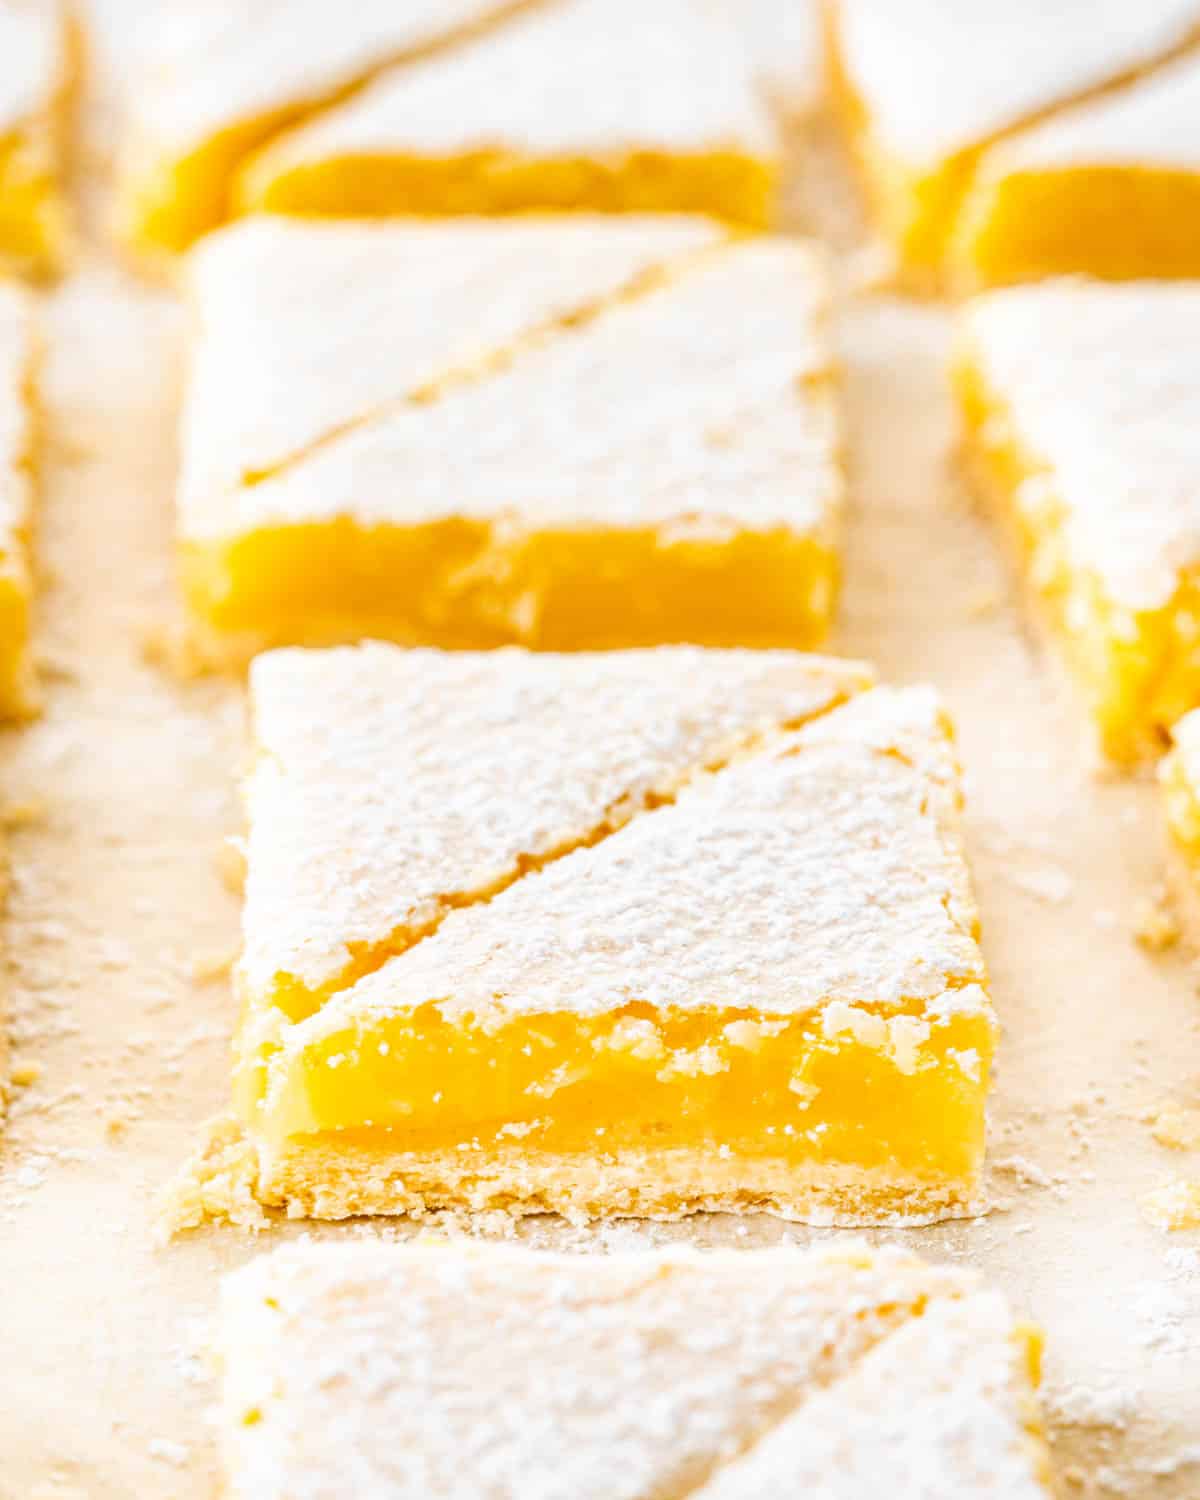 lemon bars cut into triangles and dusted with icing sugar.